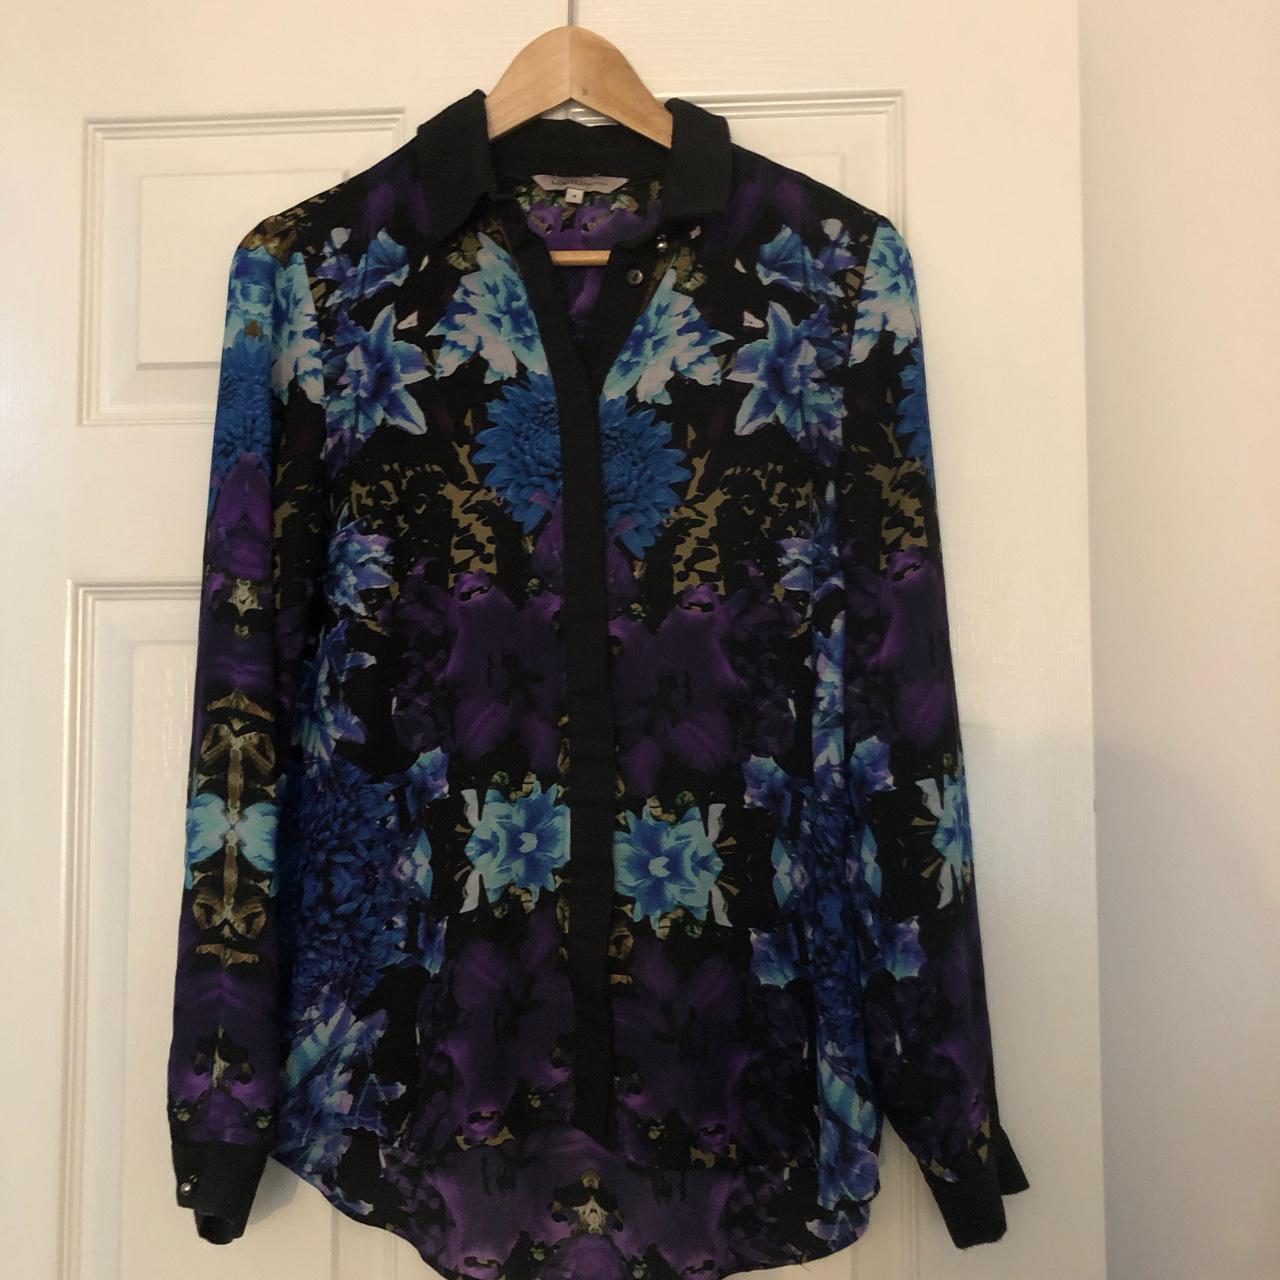 Product Image 1 - Floral shirt/blouse 

Shirt from Marks